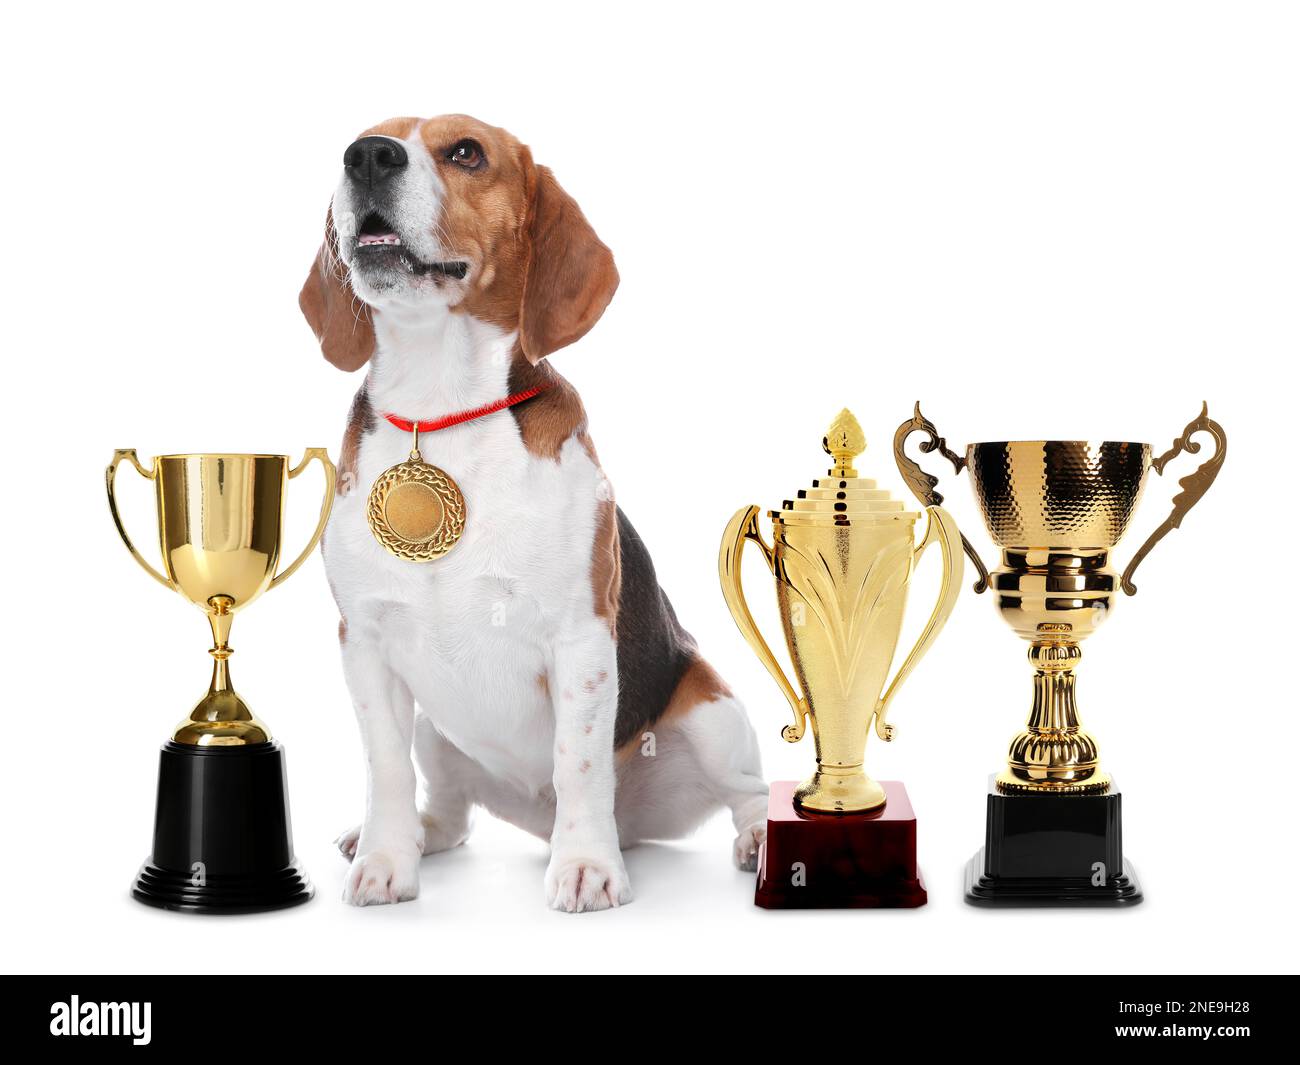 https://c8.alamy.com/comp/2NE9H28/cute-beagle-dog-with-gold-medal-and-trophy-cups-on-white-background-2NE9H28.jpg